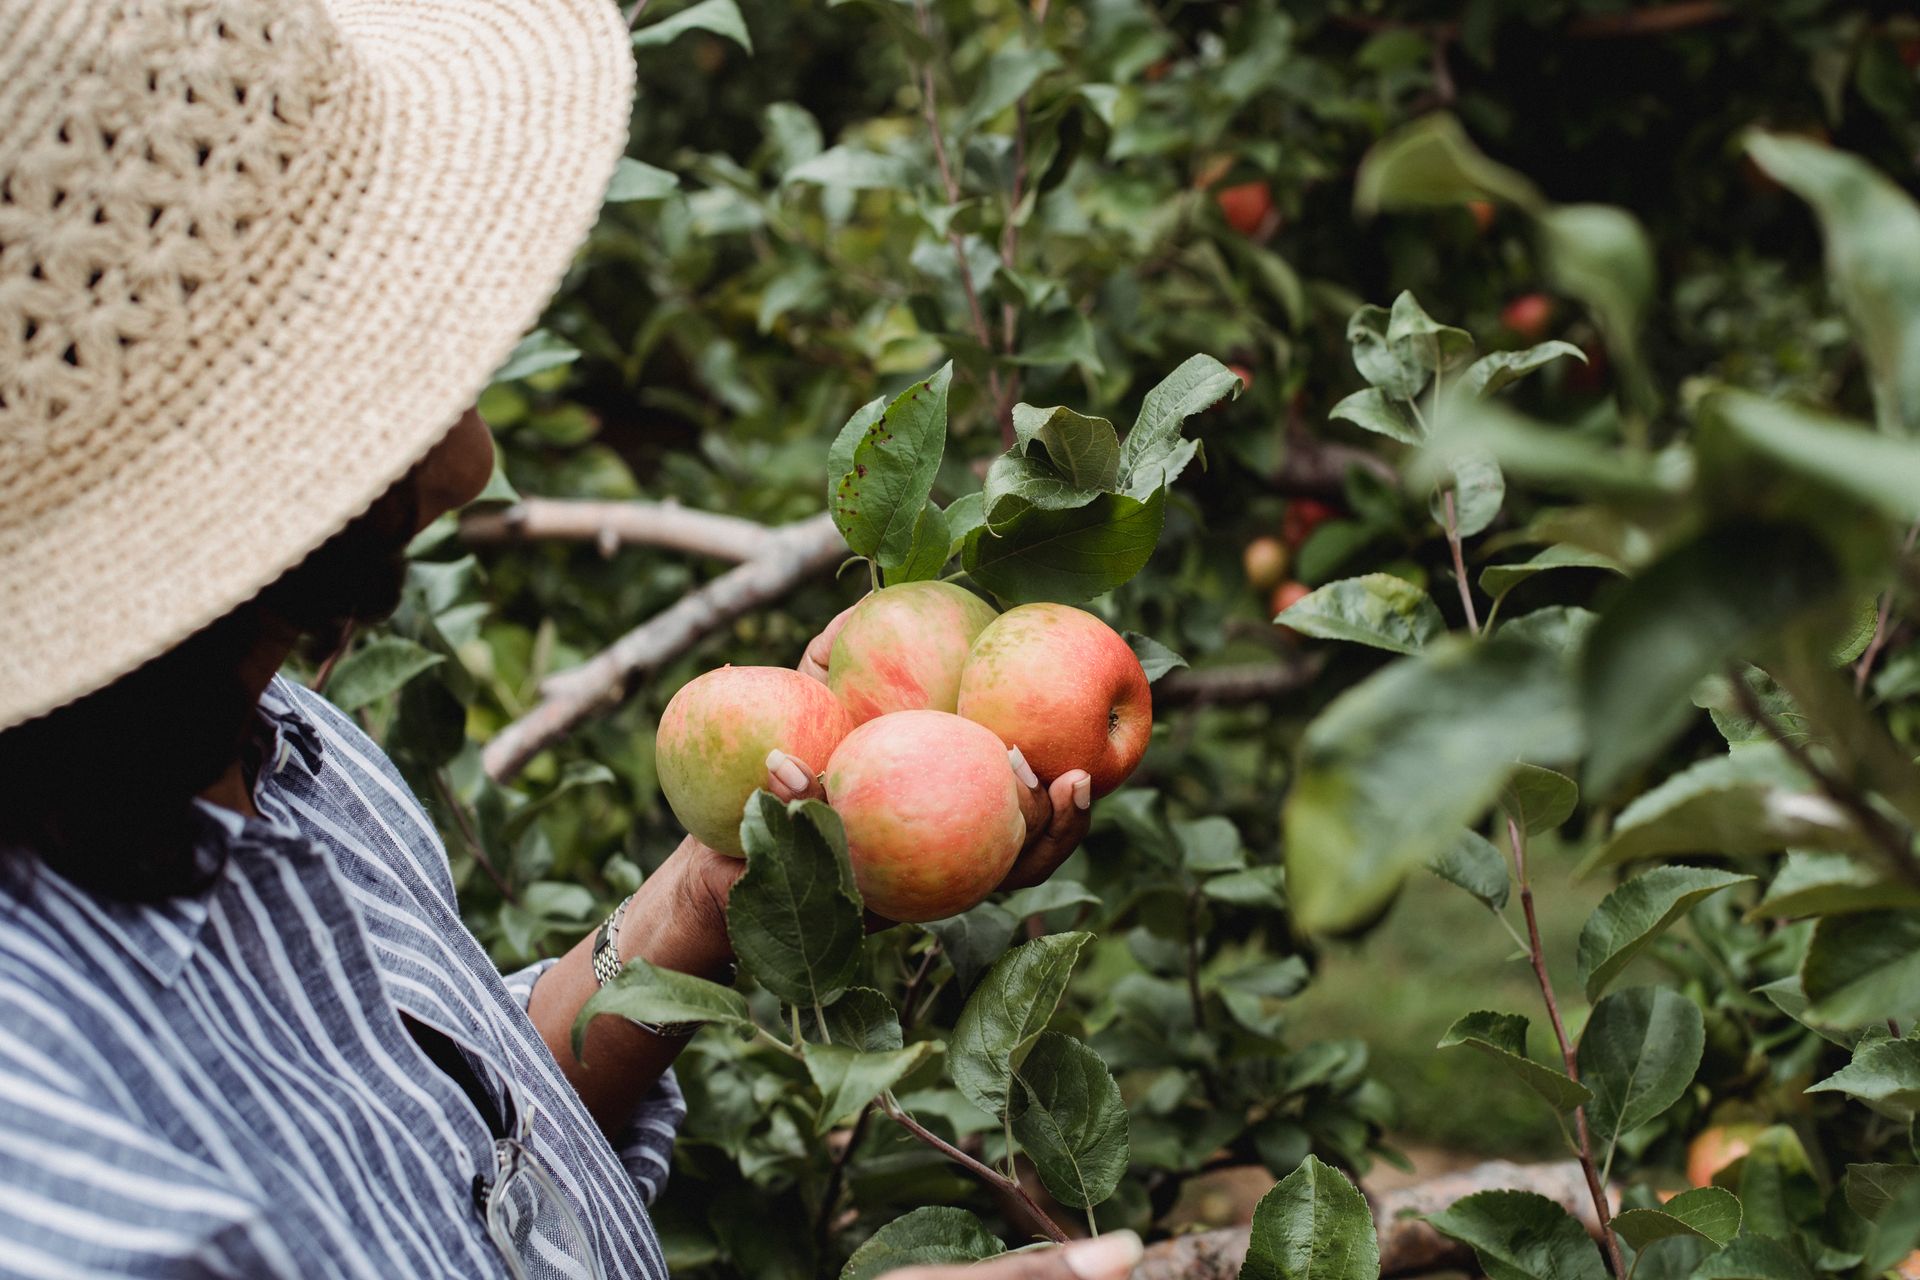 A man in a straw hat is picking apples from a tree.